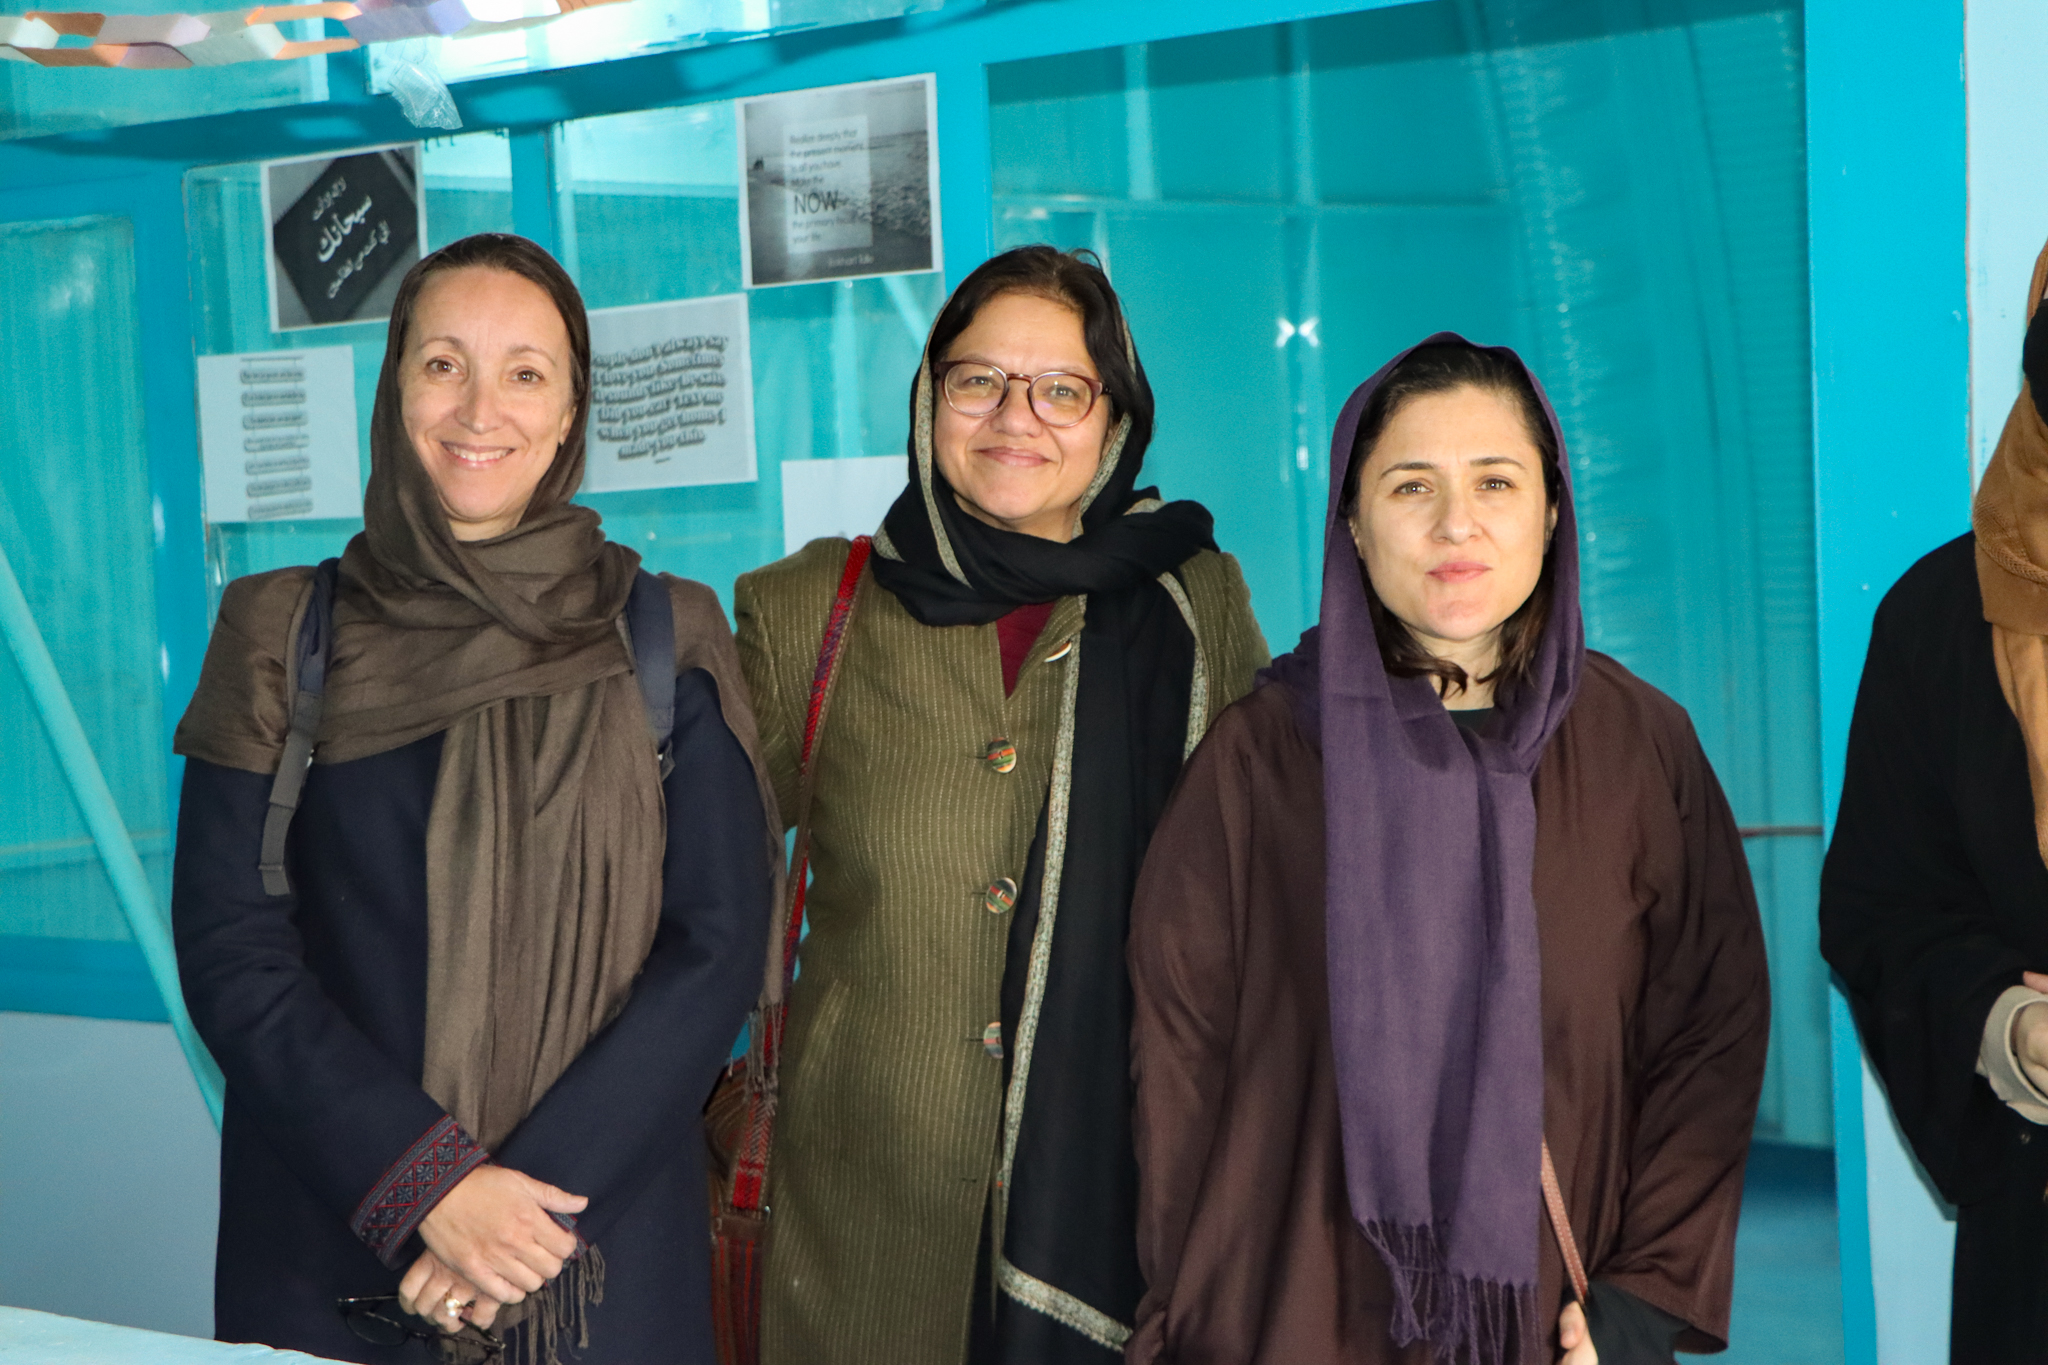 Left to right: Muriel Jourdan from UNODC, Anubha Sood, Representative for UNODC Afghanistan, and Alison Davidian, UN Women Special Representative in Afghanistan. Credit: Office of the Prison Administration